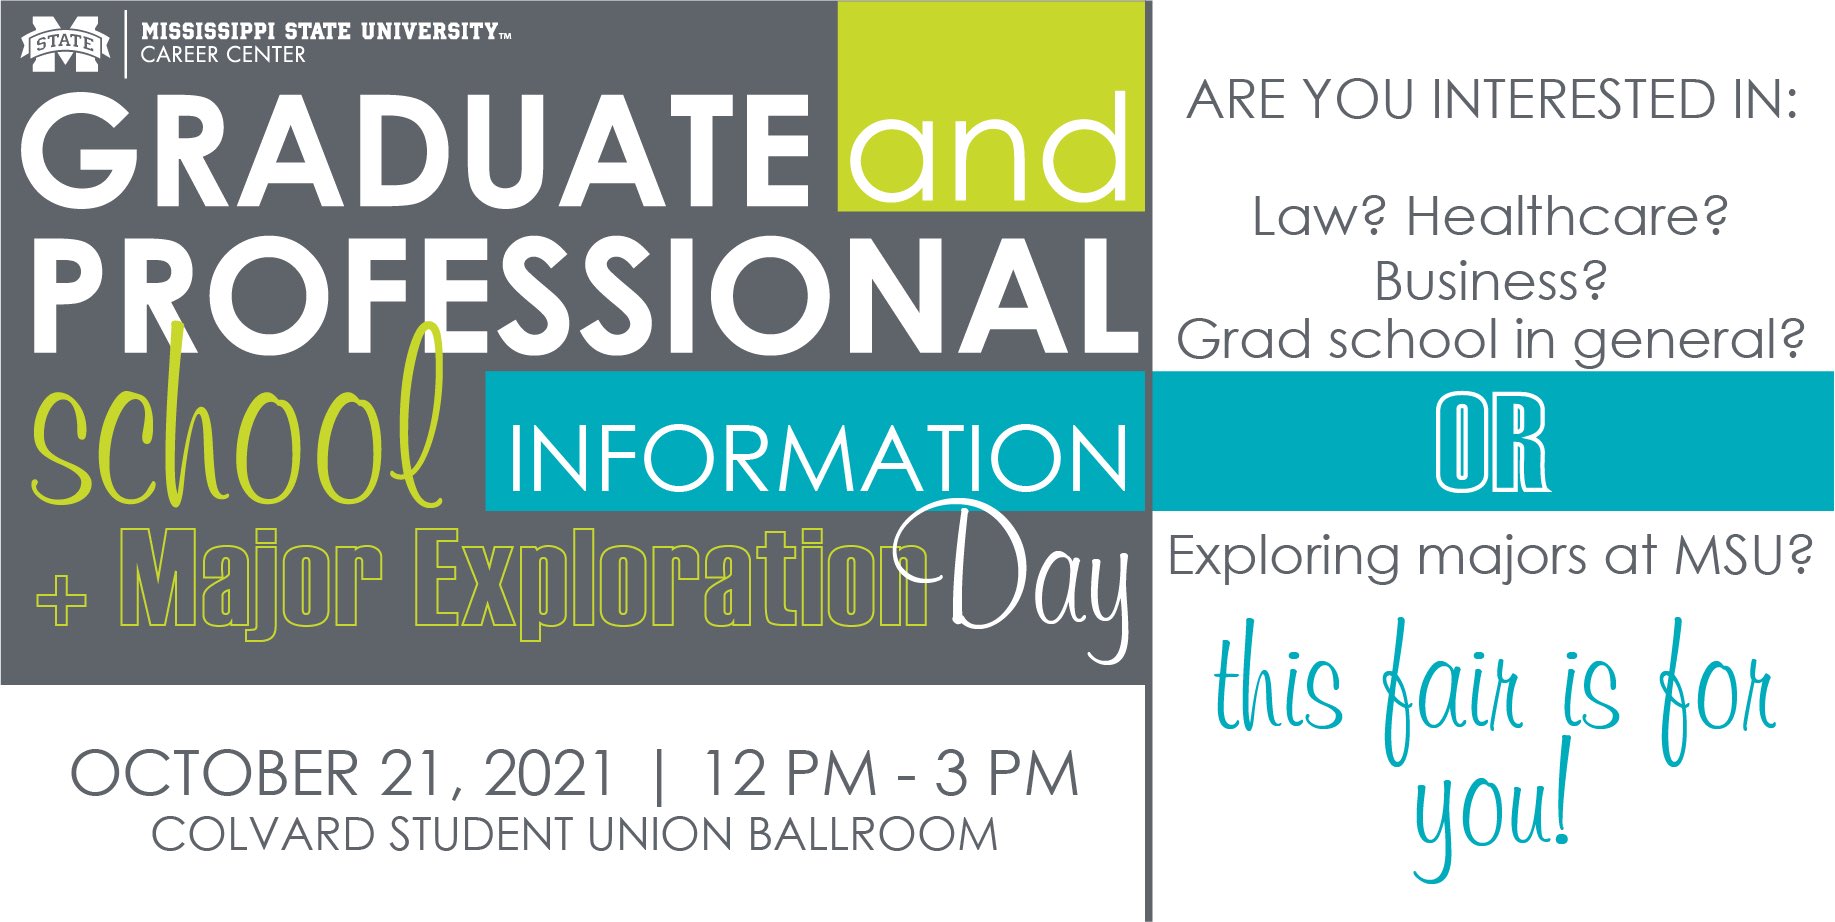 Gray, lime green, aqua and white graphic promoting MSU's Graduate and Professional School Information and Major Exploration Day